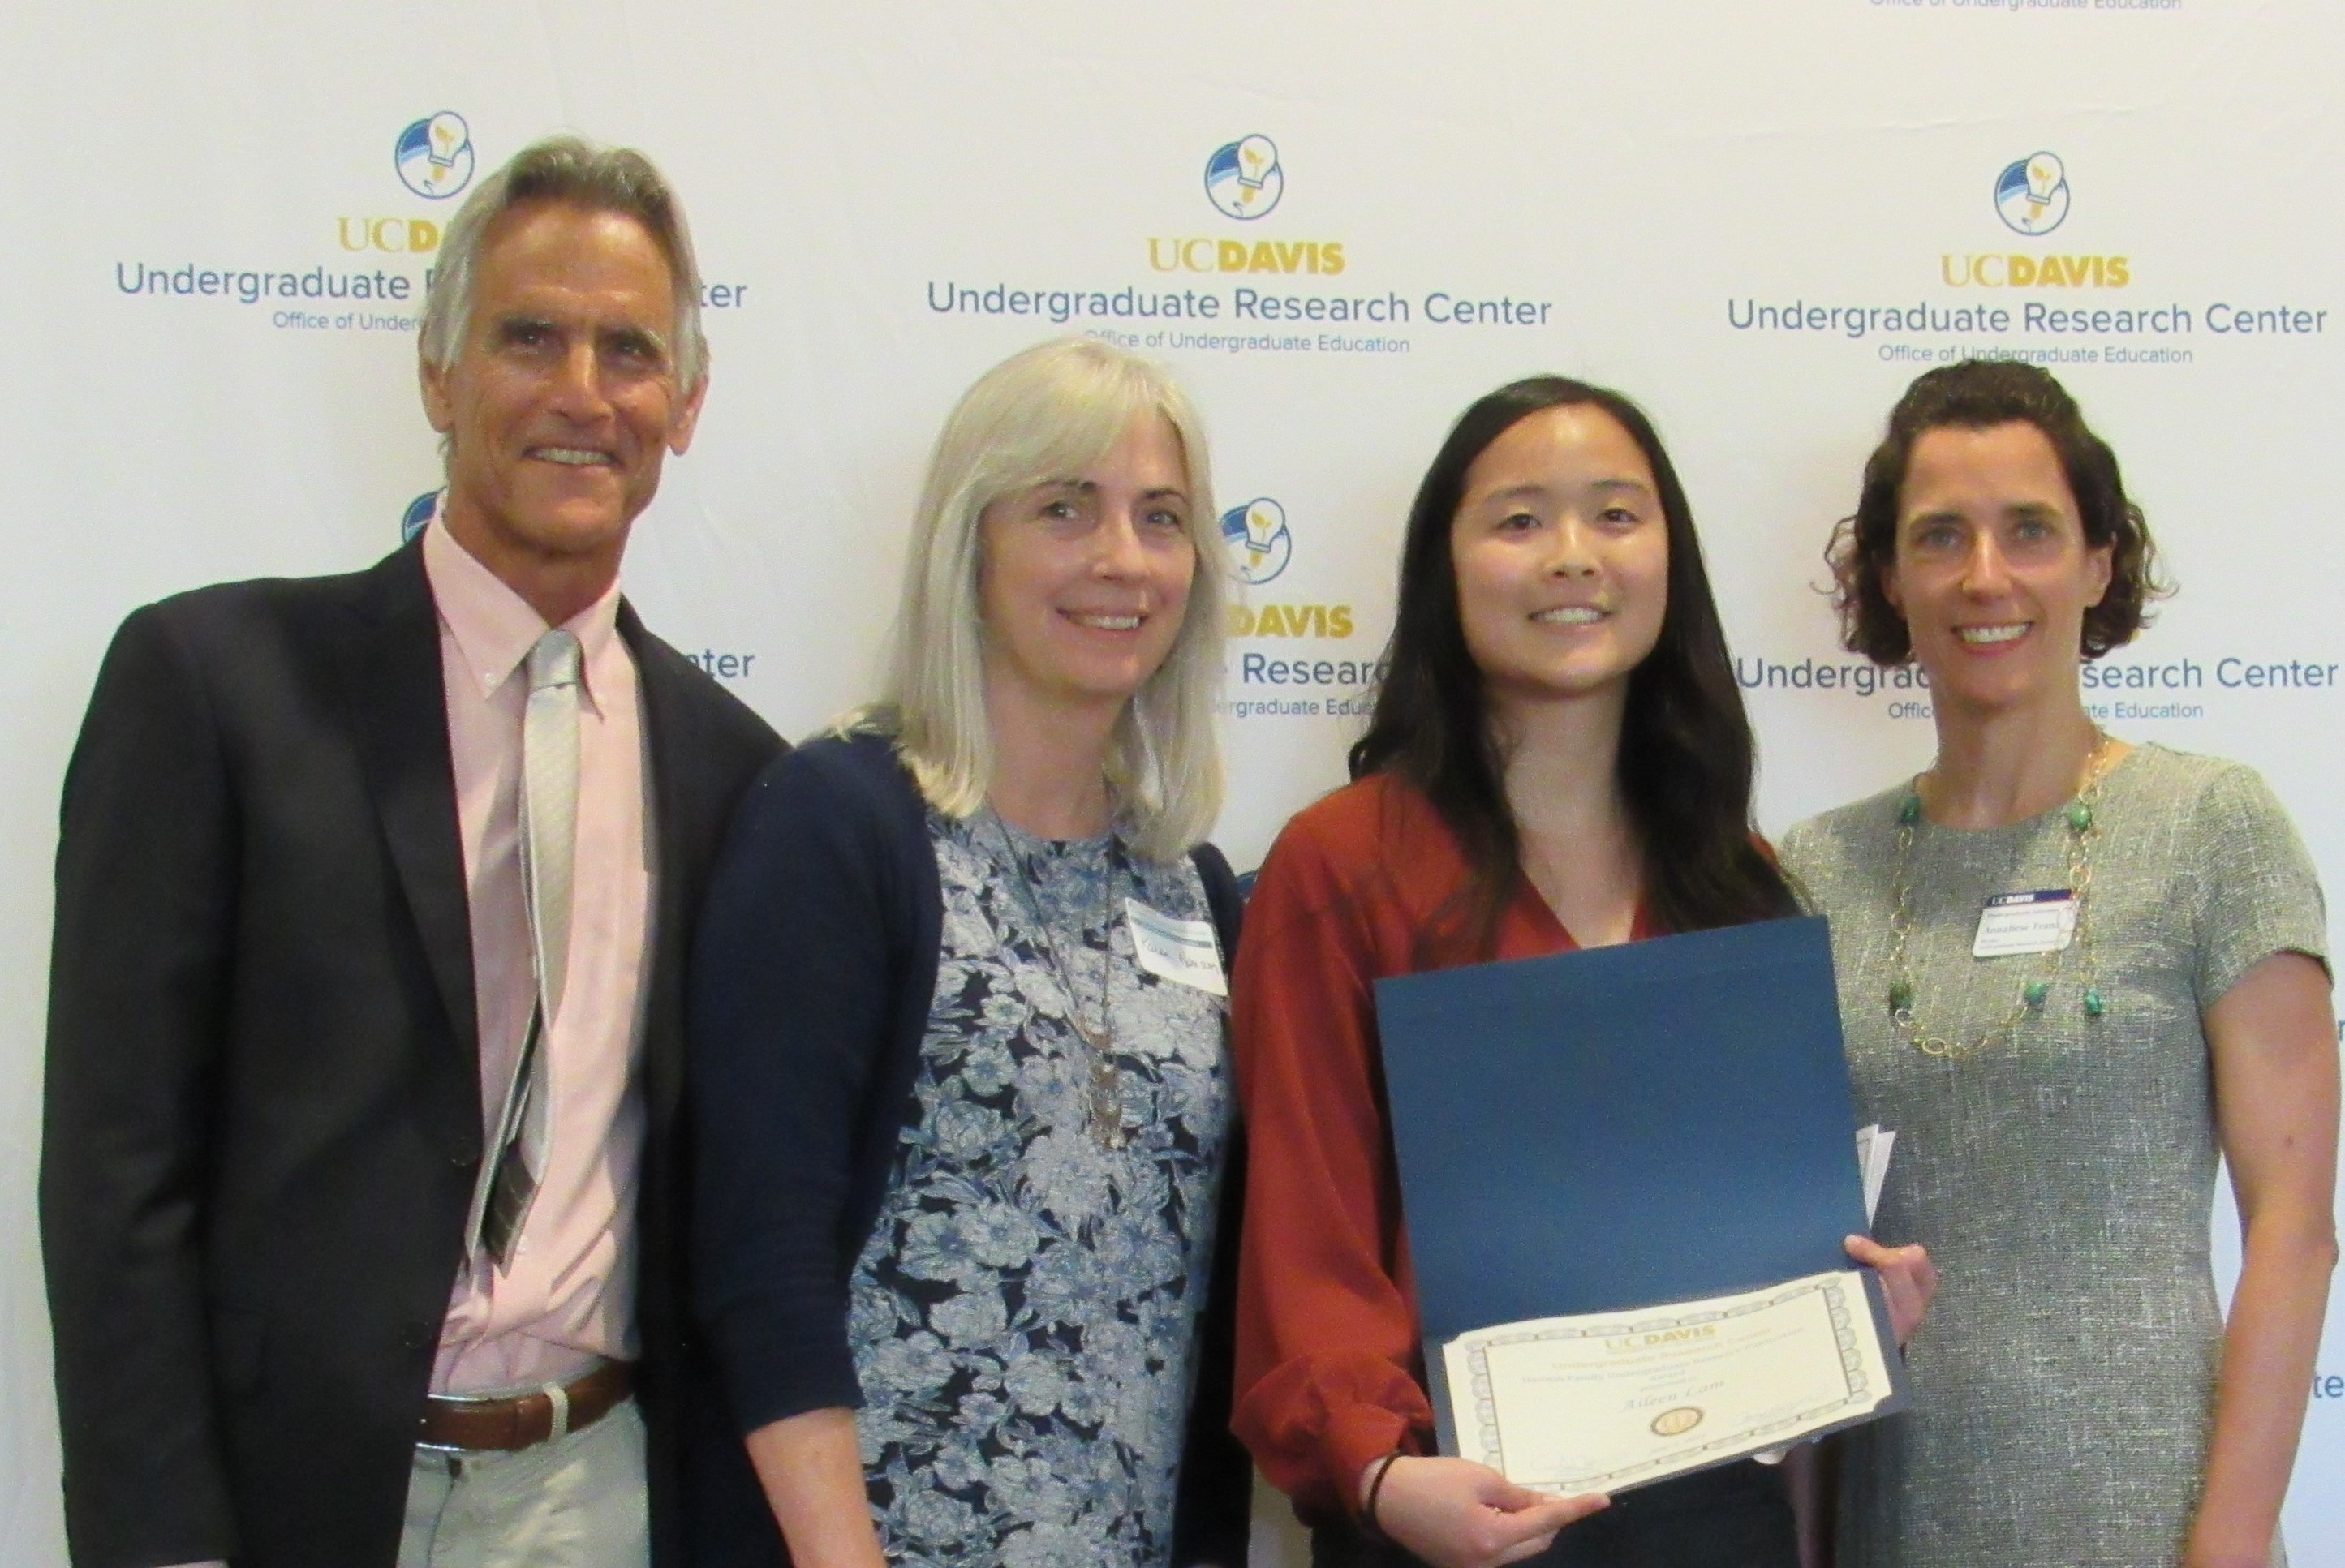 Photo of Steve and Karen Hanson and Annaliese Franz standing with Publication Award Recipient in front of backdrop with URC logos